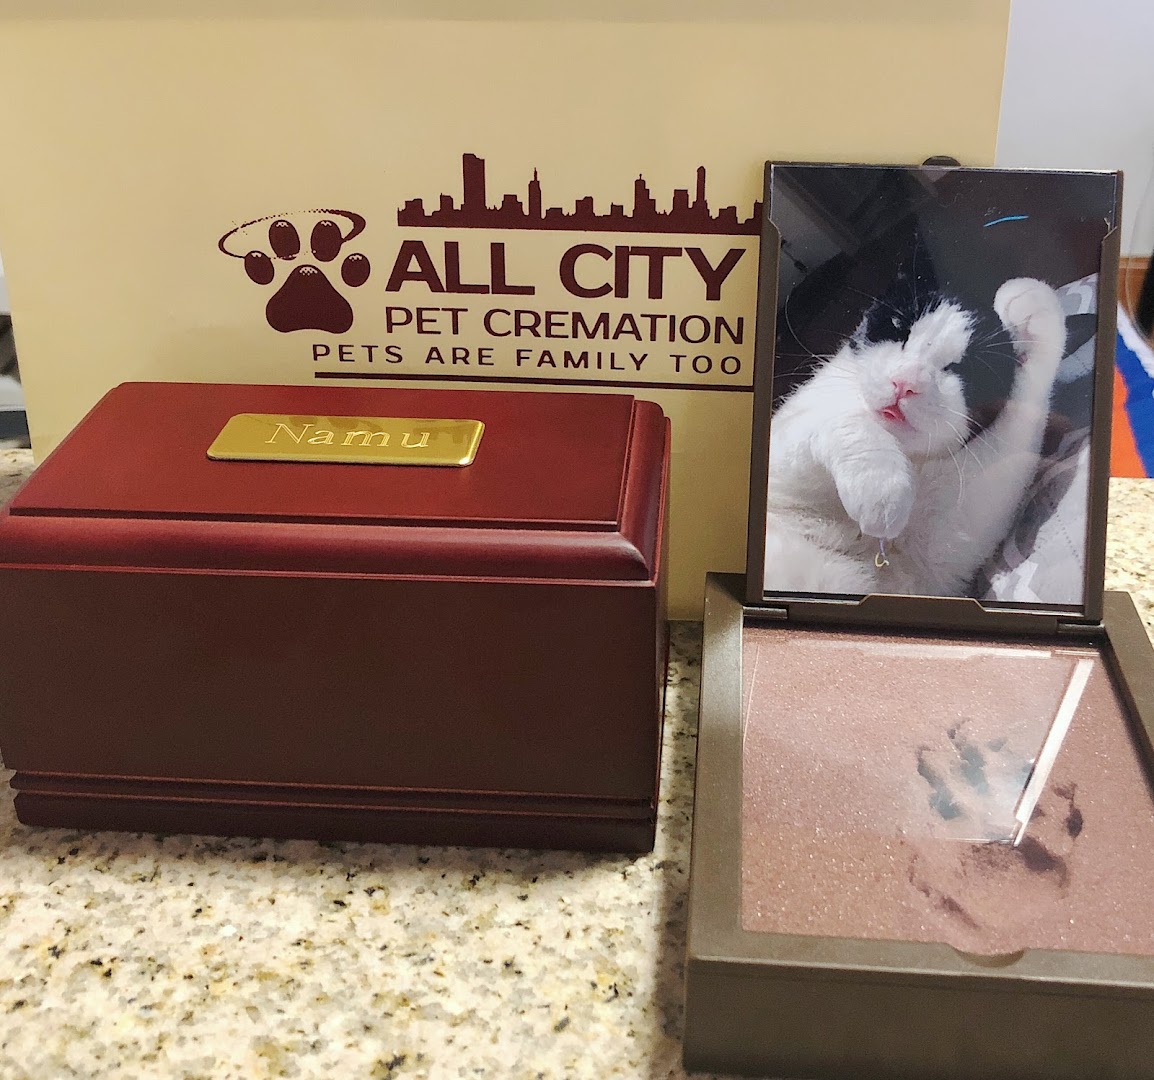 All City Pet Cremation